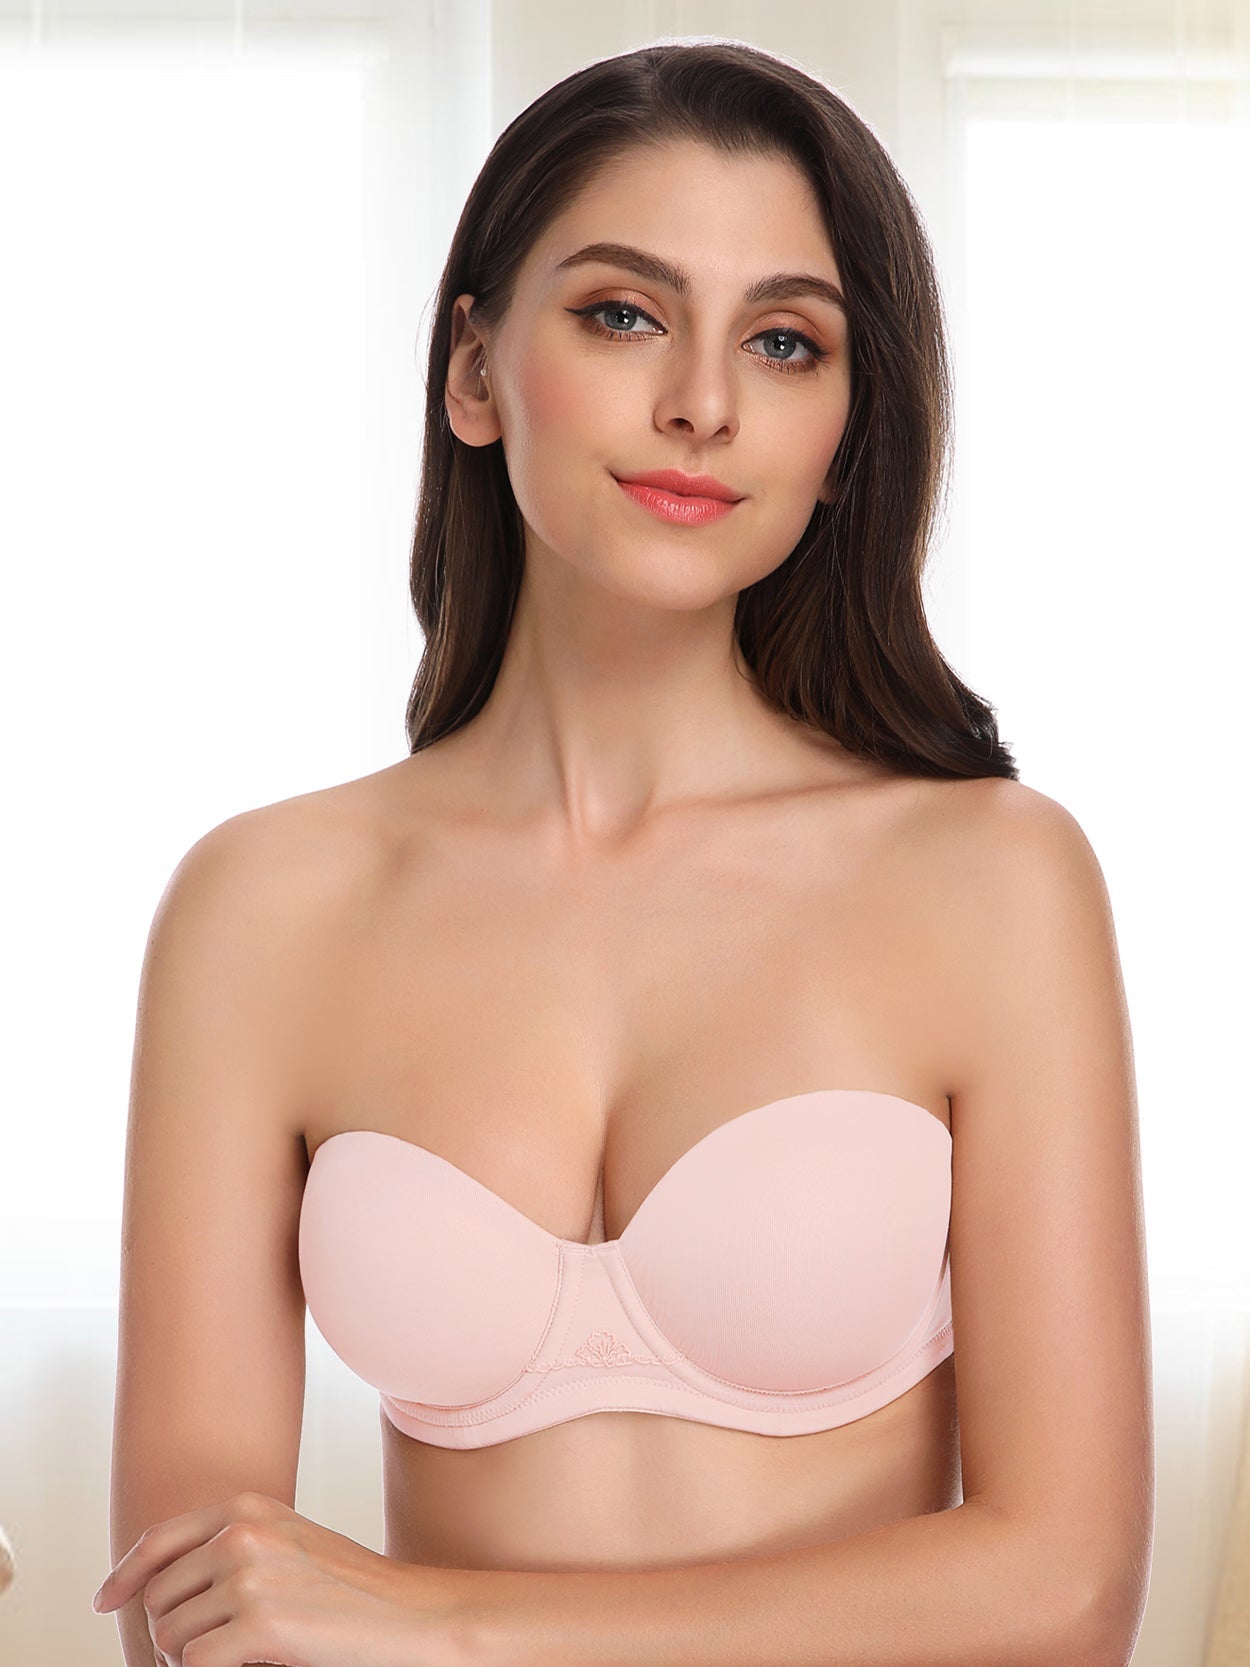 Wireless Bra Strapless Bras Bandeau Padded Seamless Underwear Simple Color  Lightweight Undergarment Off Shoulder Clothes Party pink 